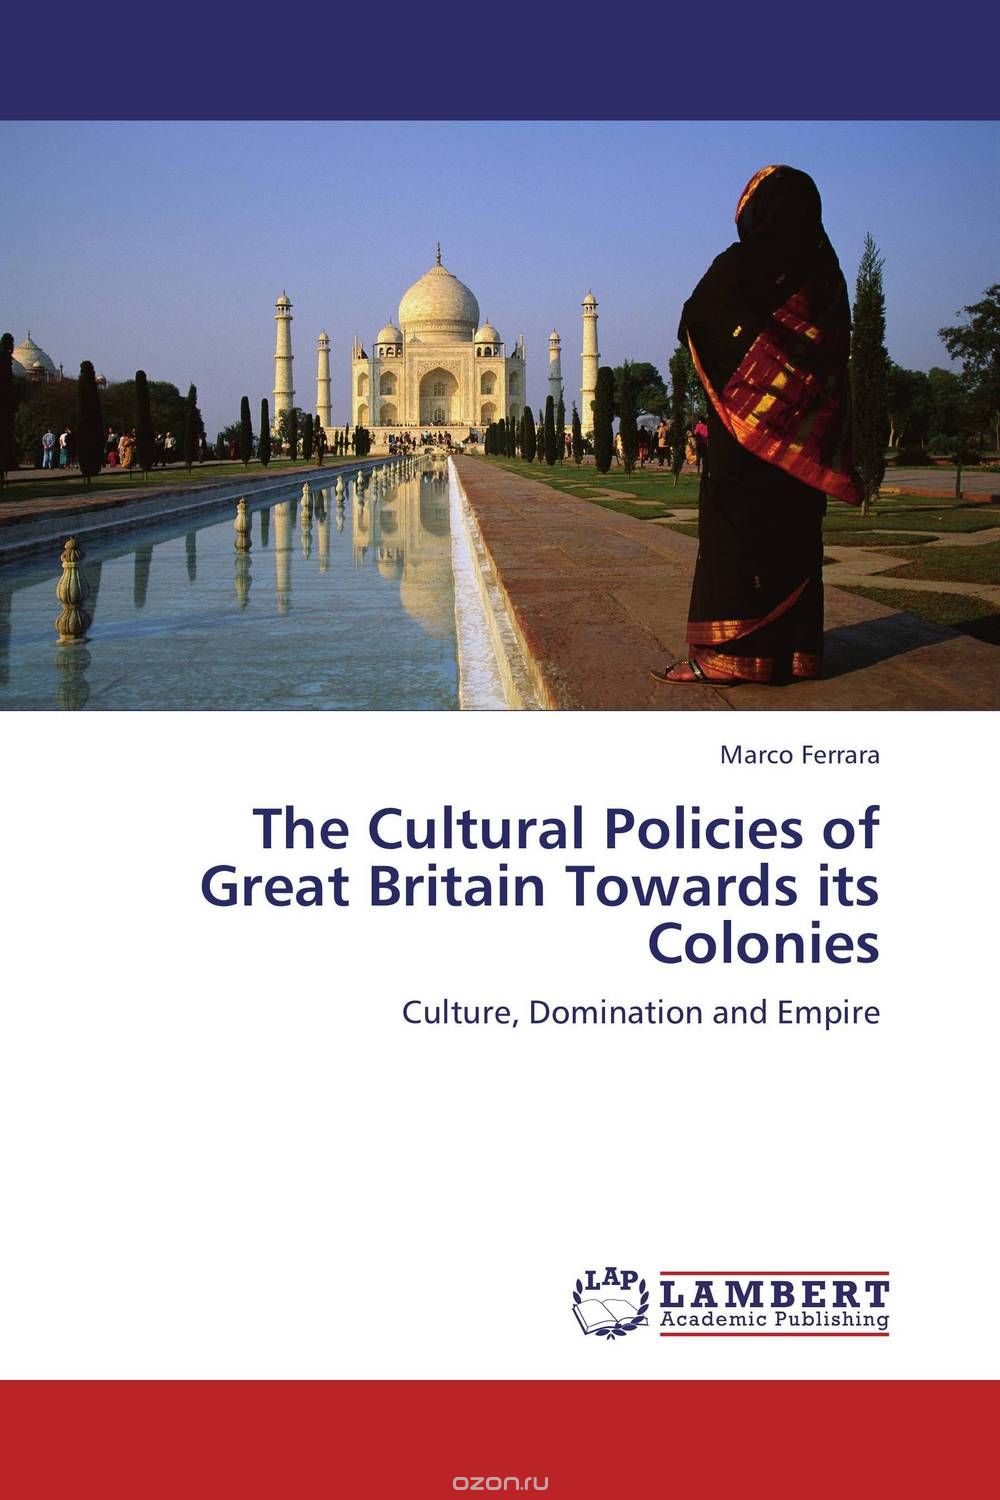 The Cultural Policies of Great Britain Towards its Colonies